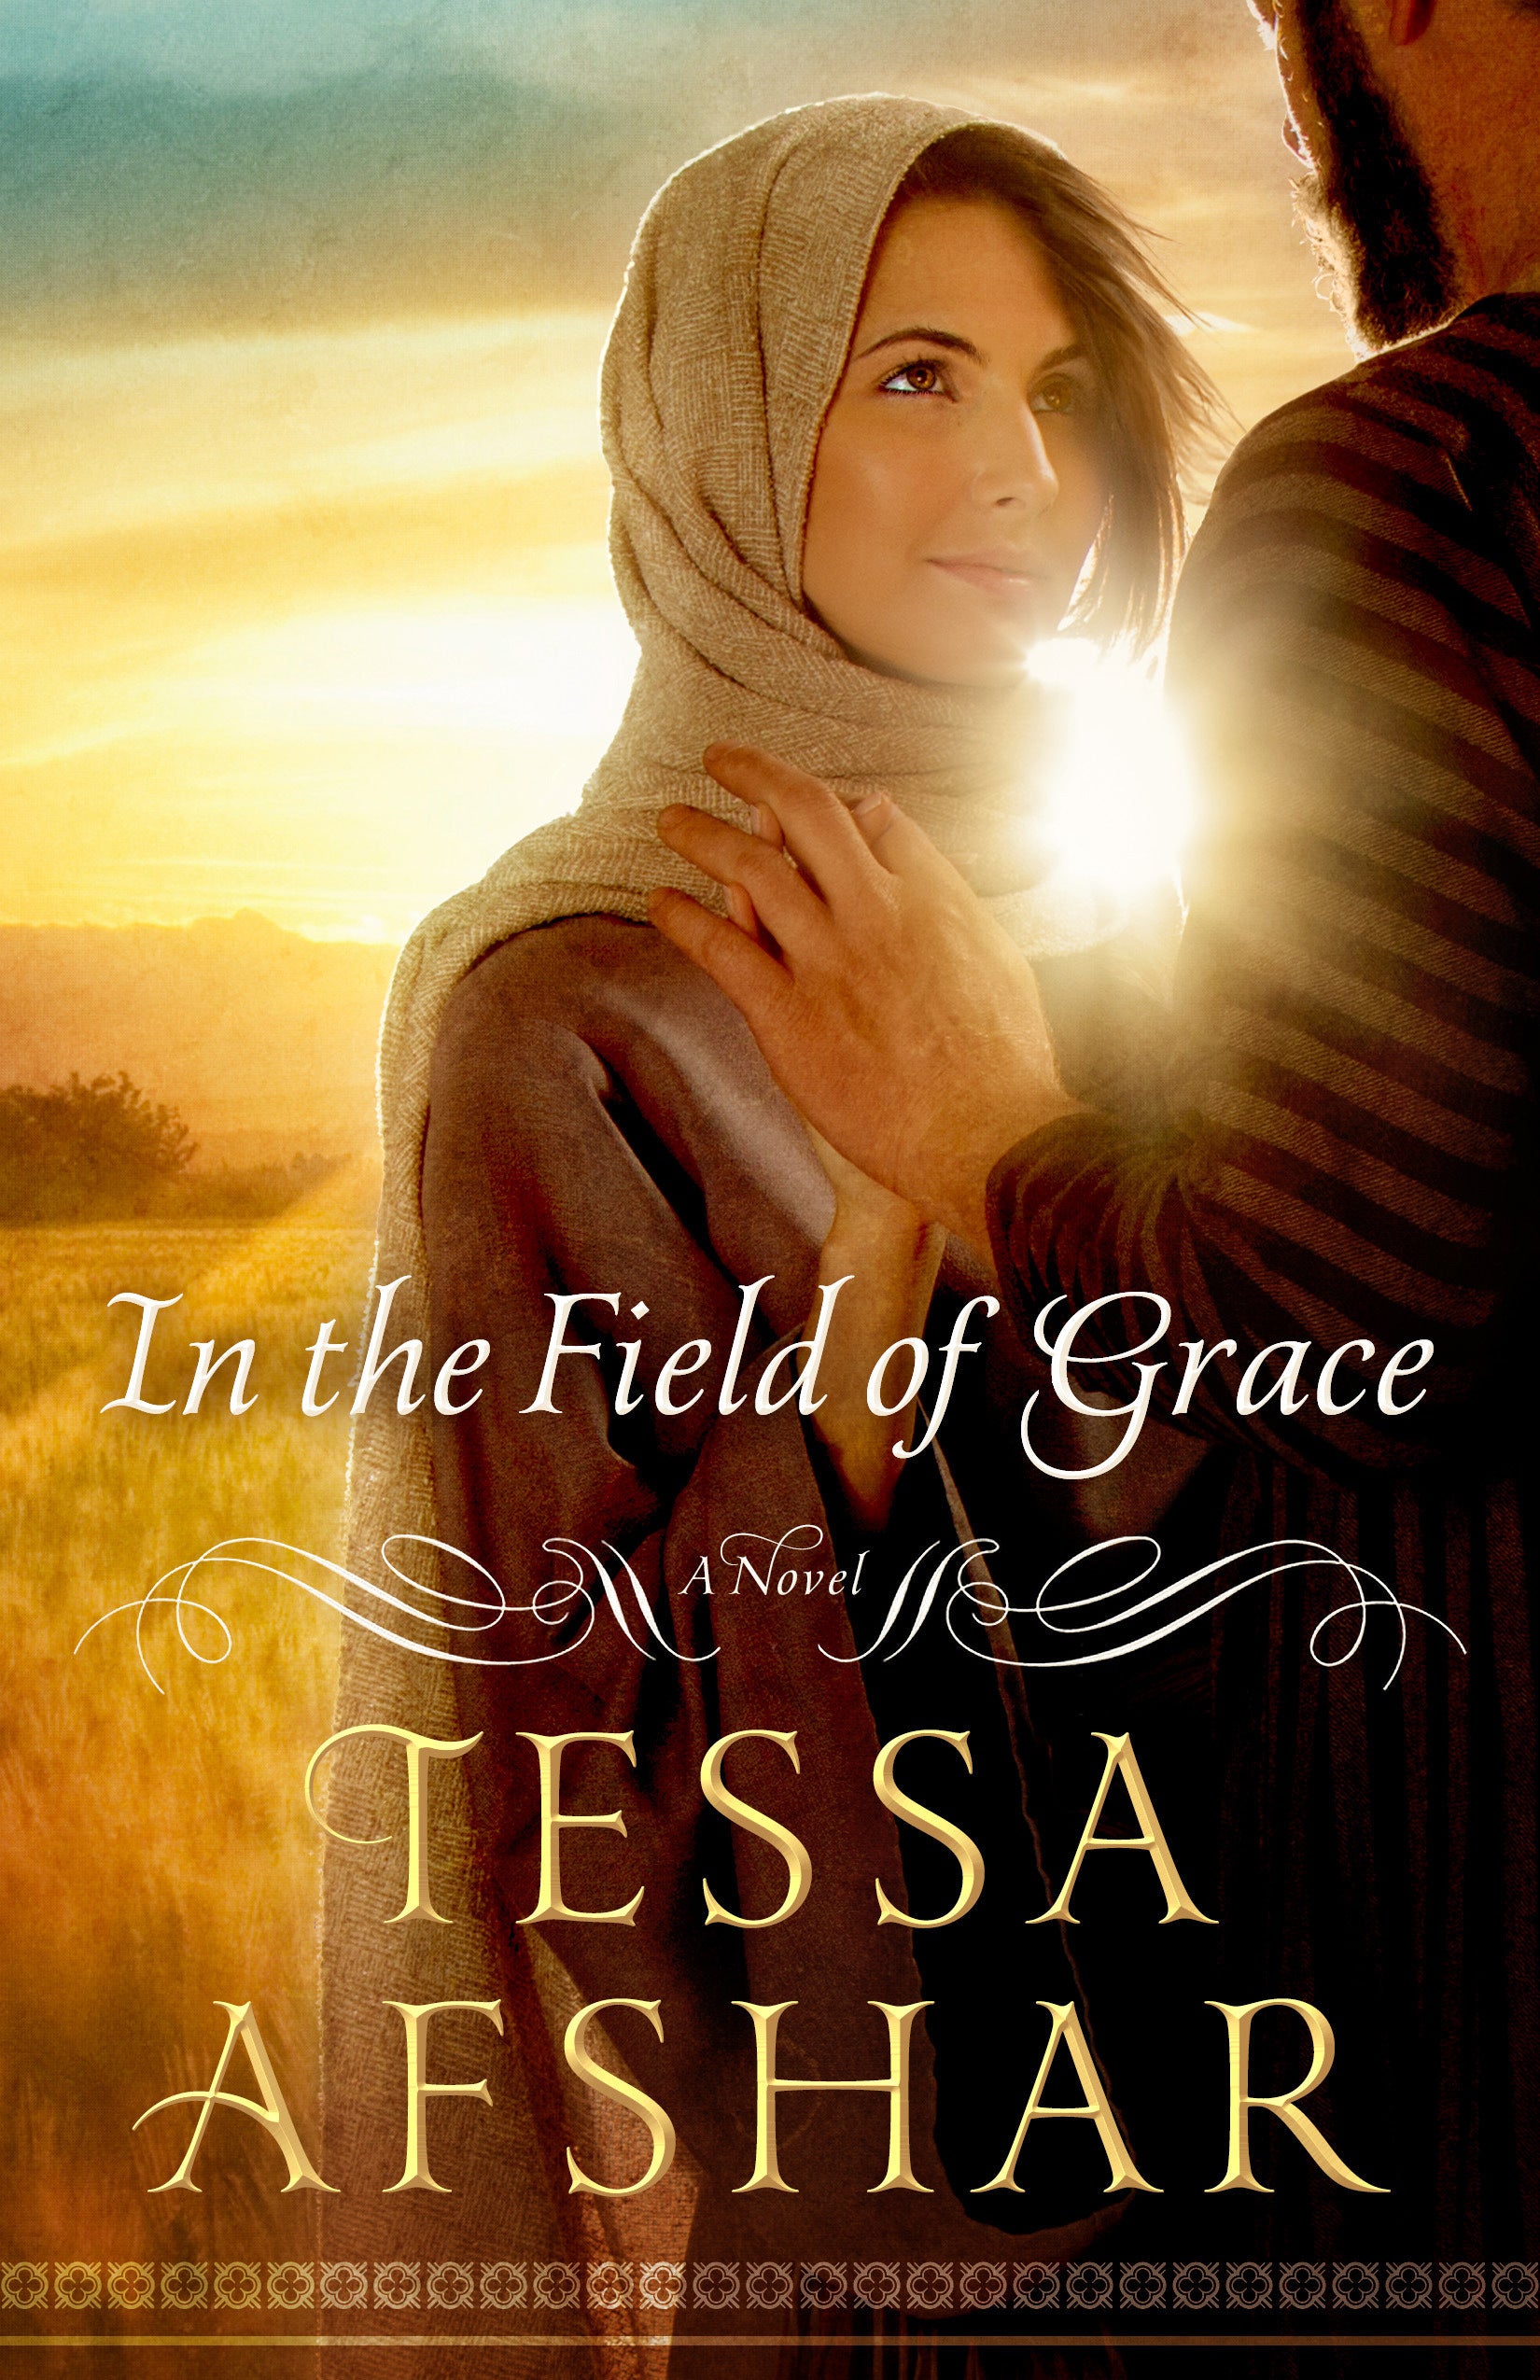 Image of In the Field of Grace other